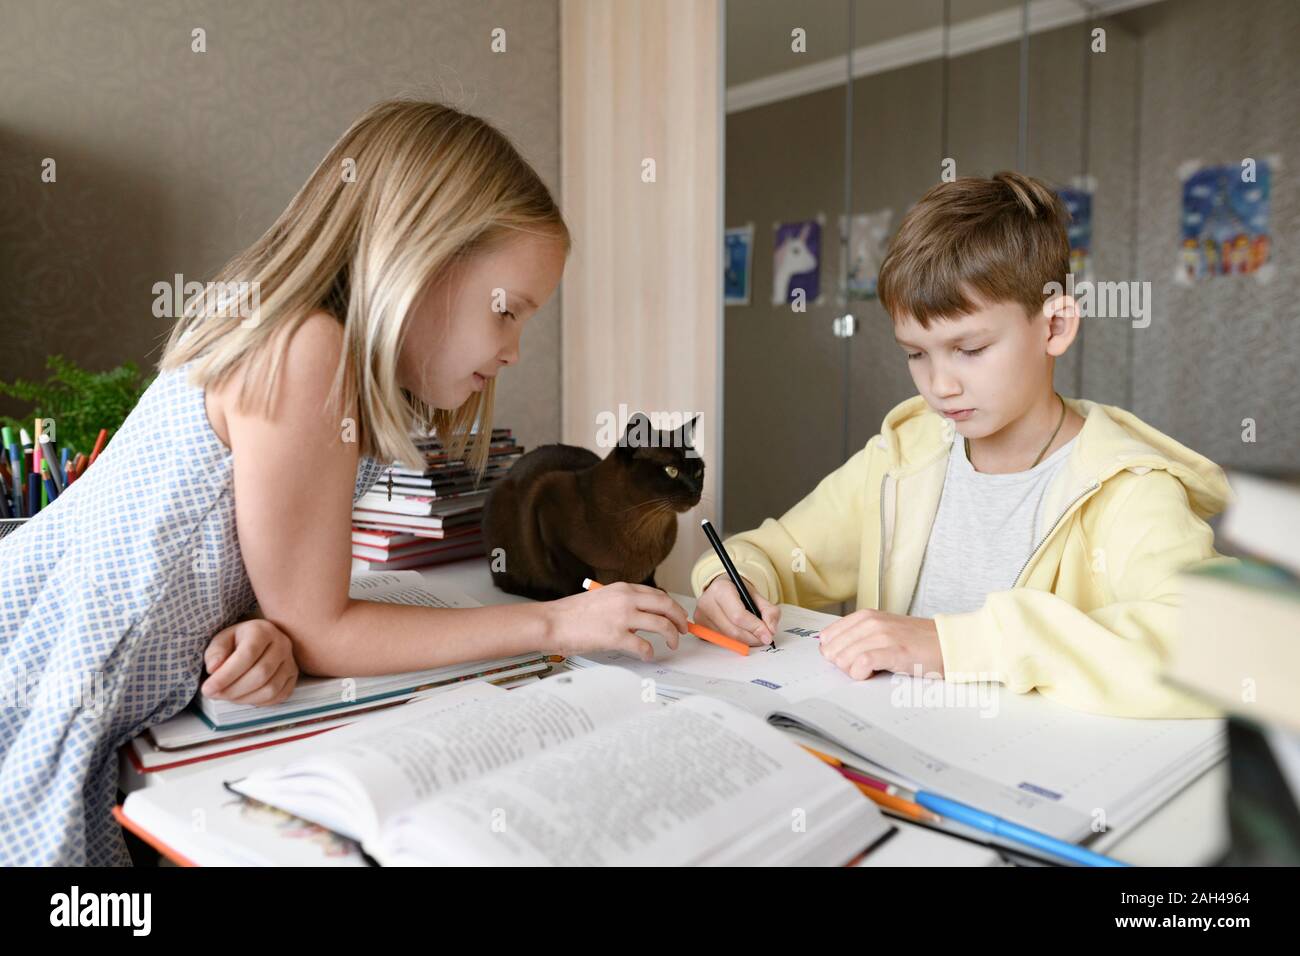 Brother and sister with a cat sitting at table at home doing homework together Stock Photo